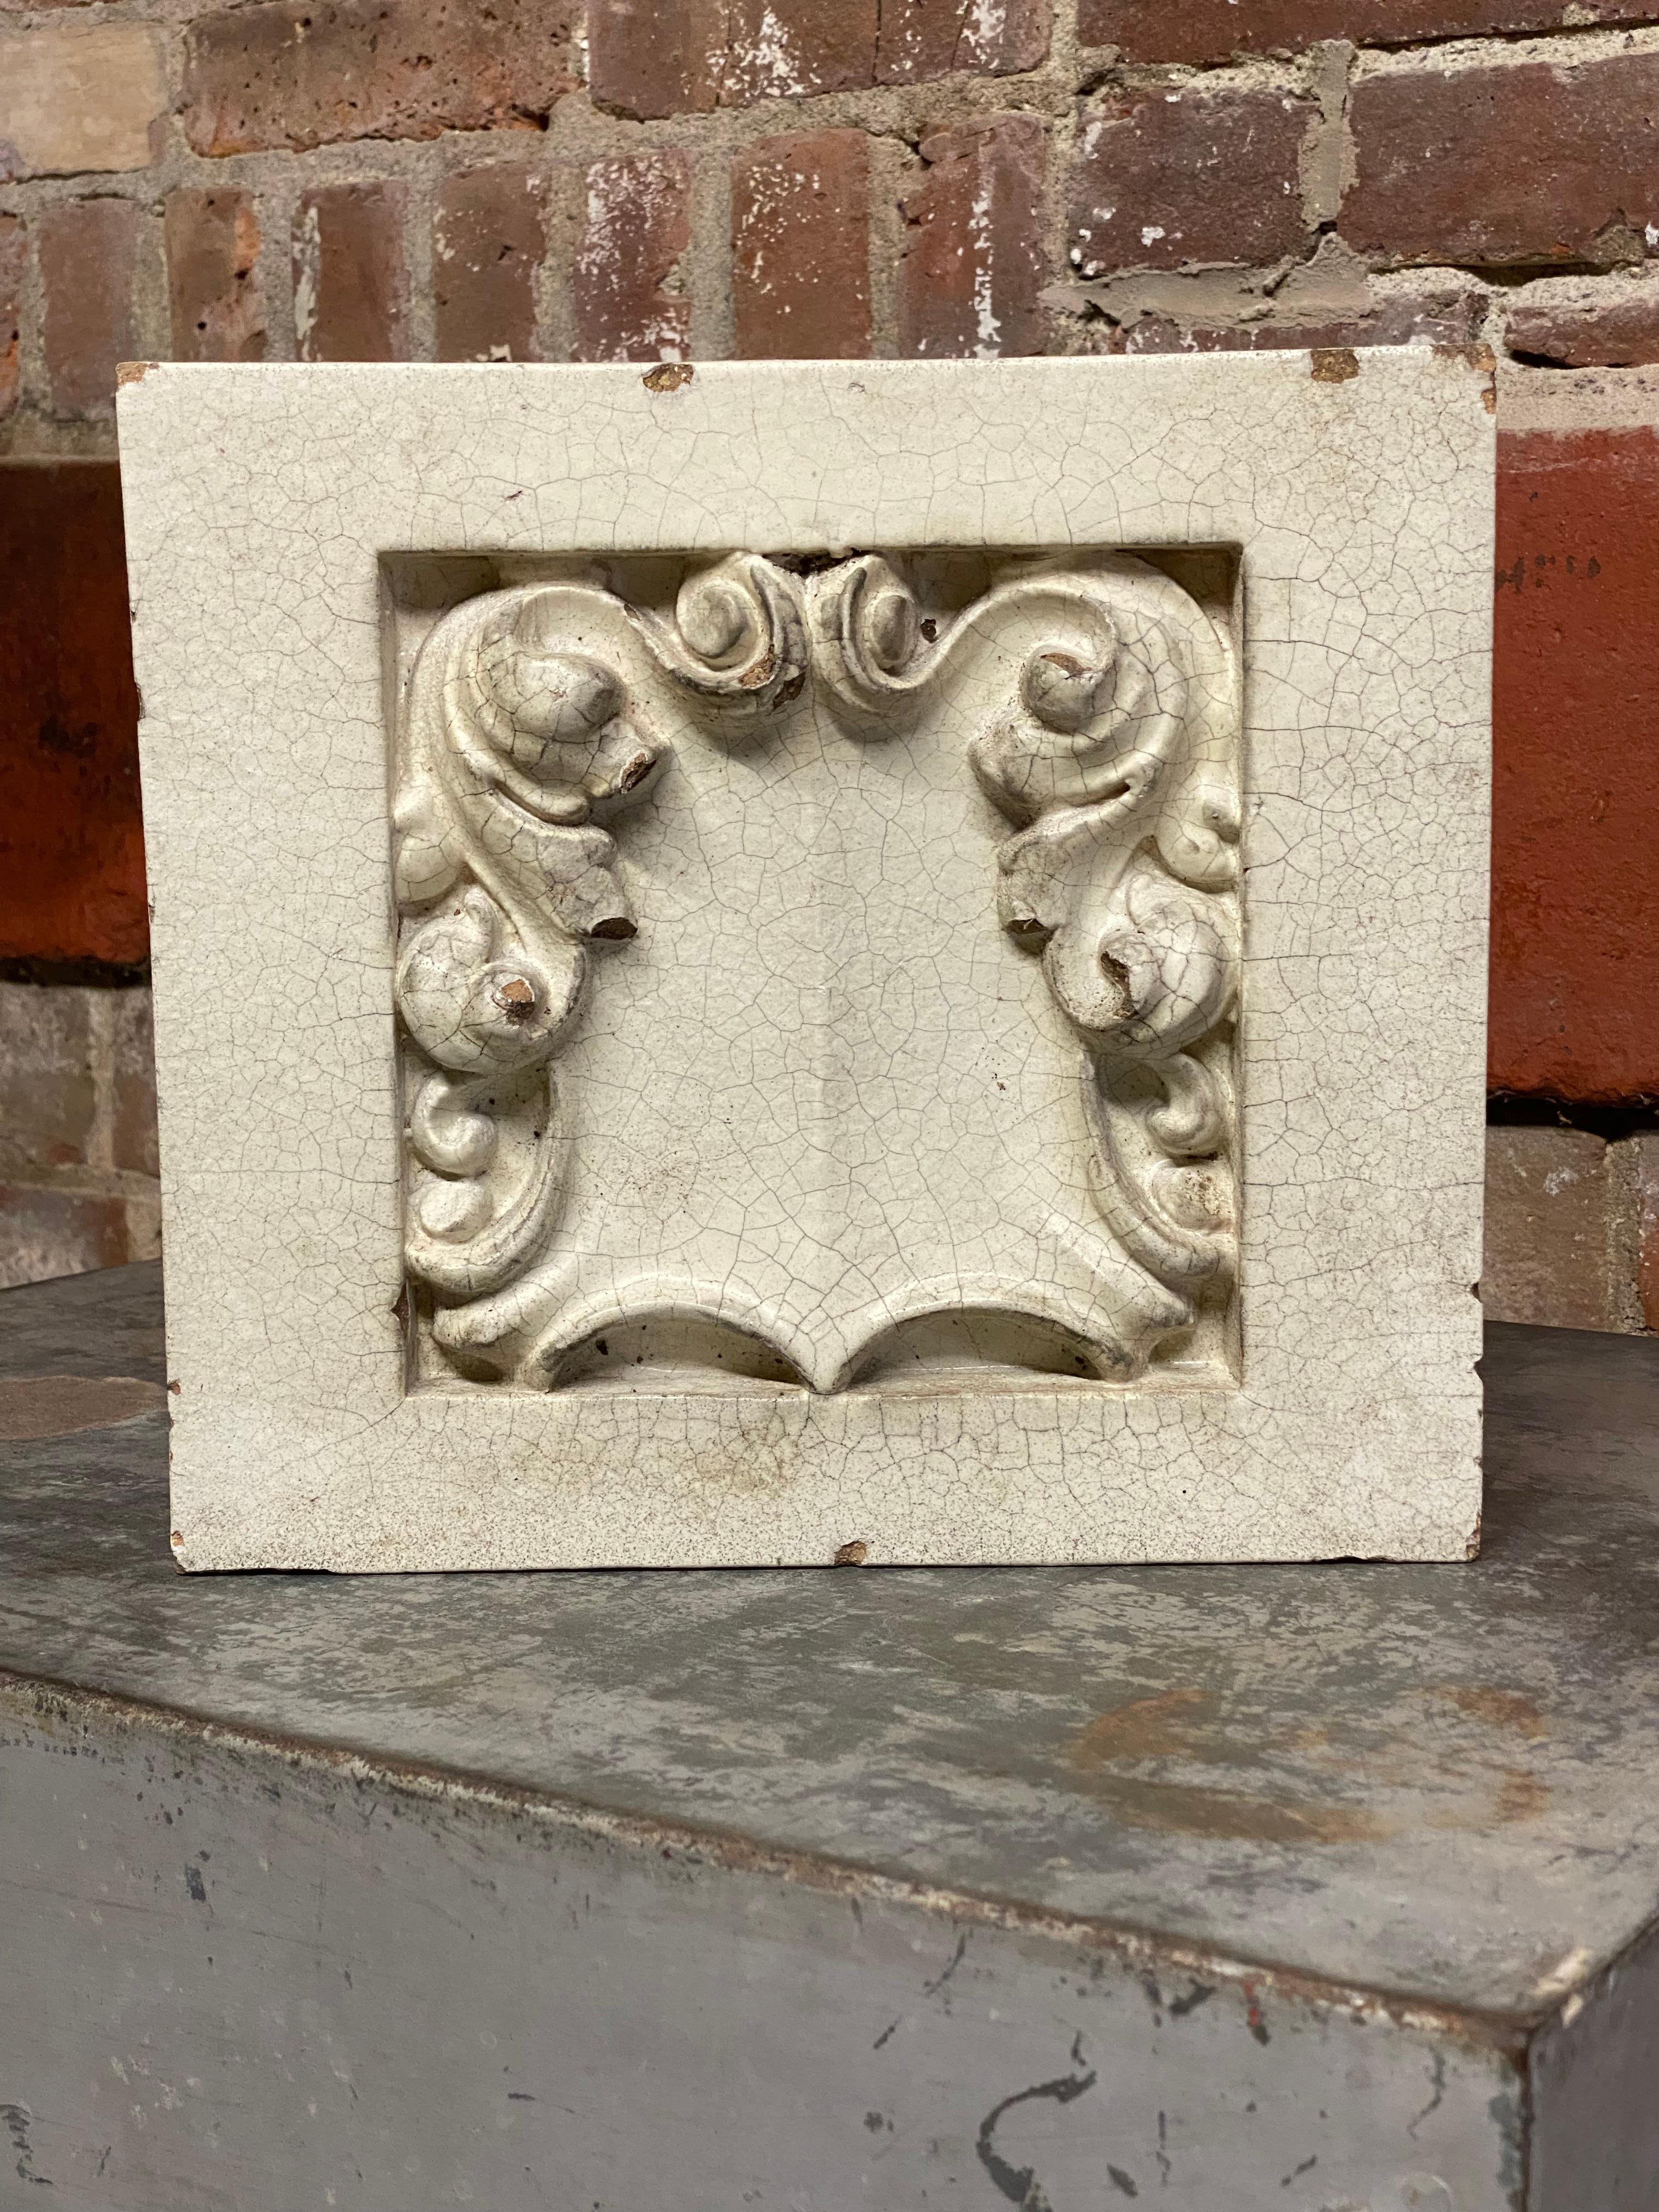 American terra-cotta Beaux Arts architectural block tile. The academic architectural style taught at the Ecole des Beaux Arts incorporates French Neo-classicism with Renaissance and Baroque elements. This architectural piece is made of cast white